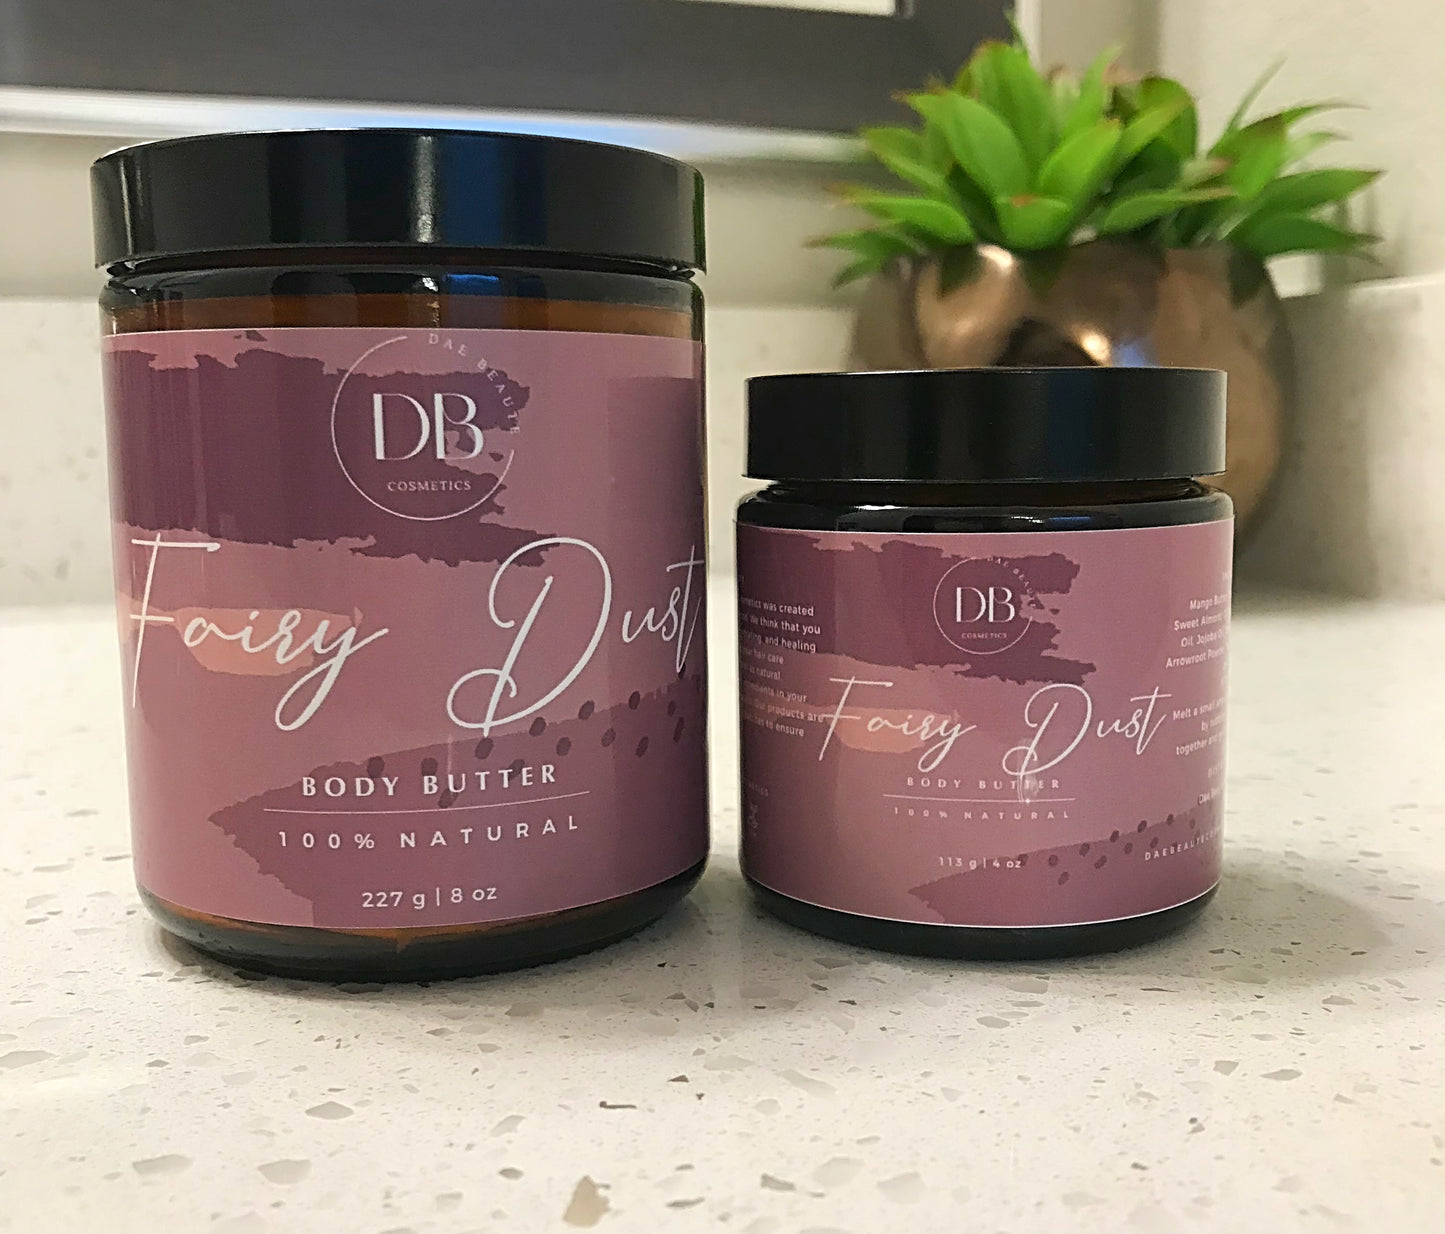 Whipped Fairy Dust Body Butter 4oz and 8oz